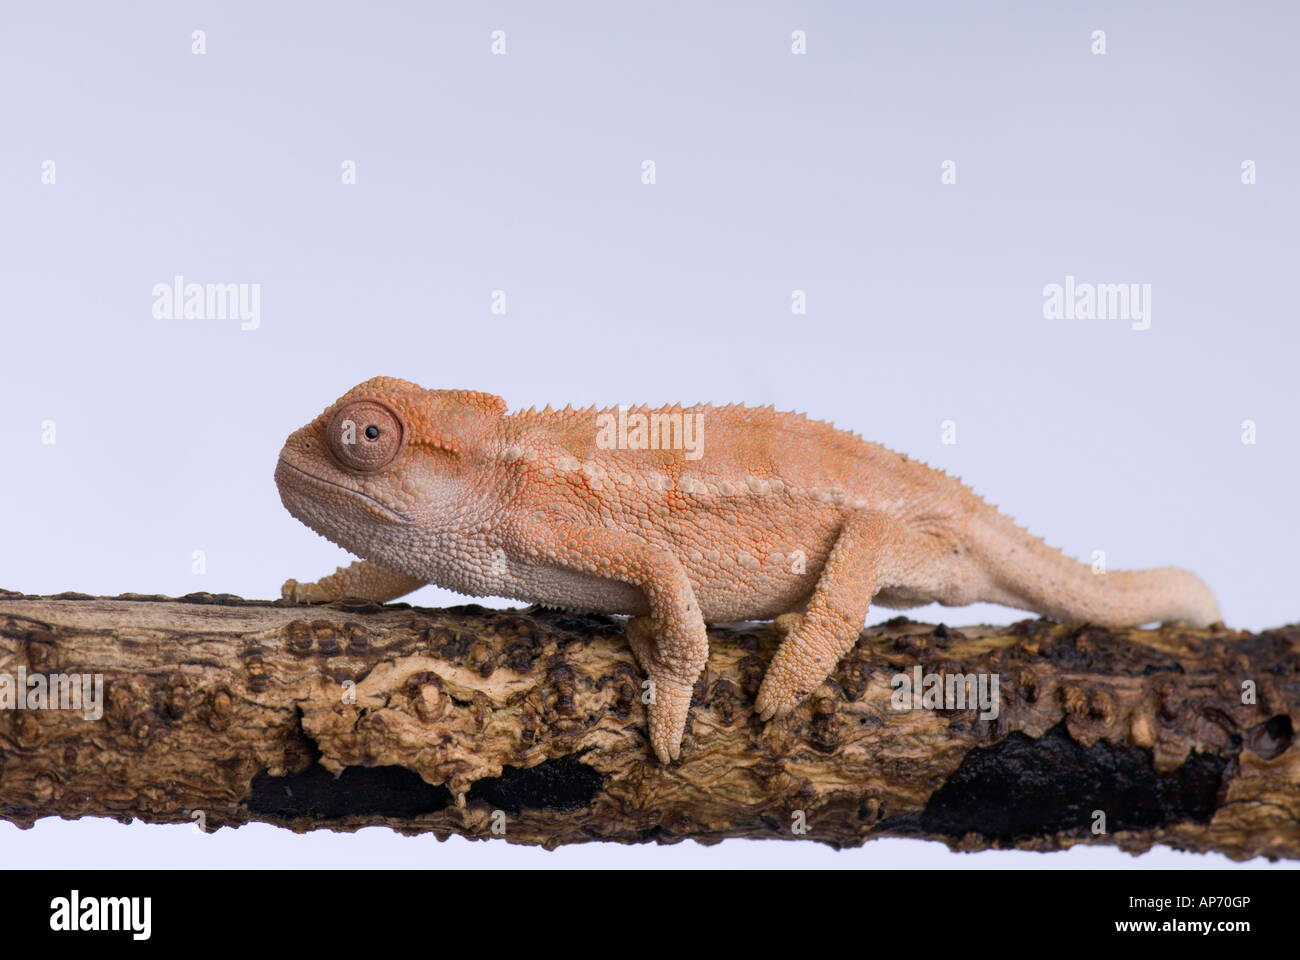 Young chameleon walking along branch Stock Photo